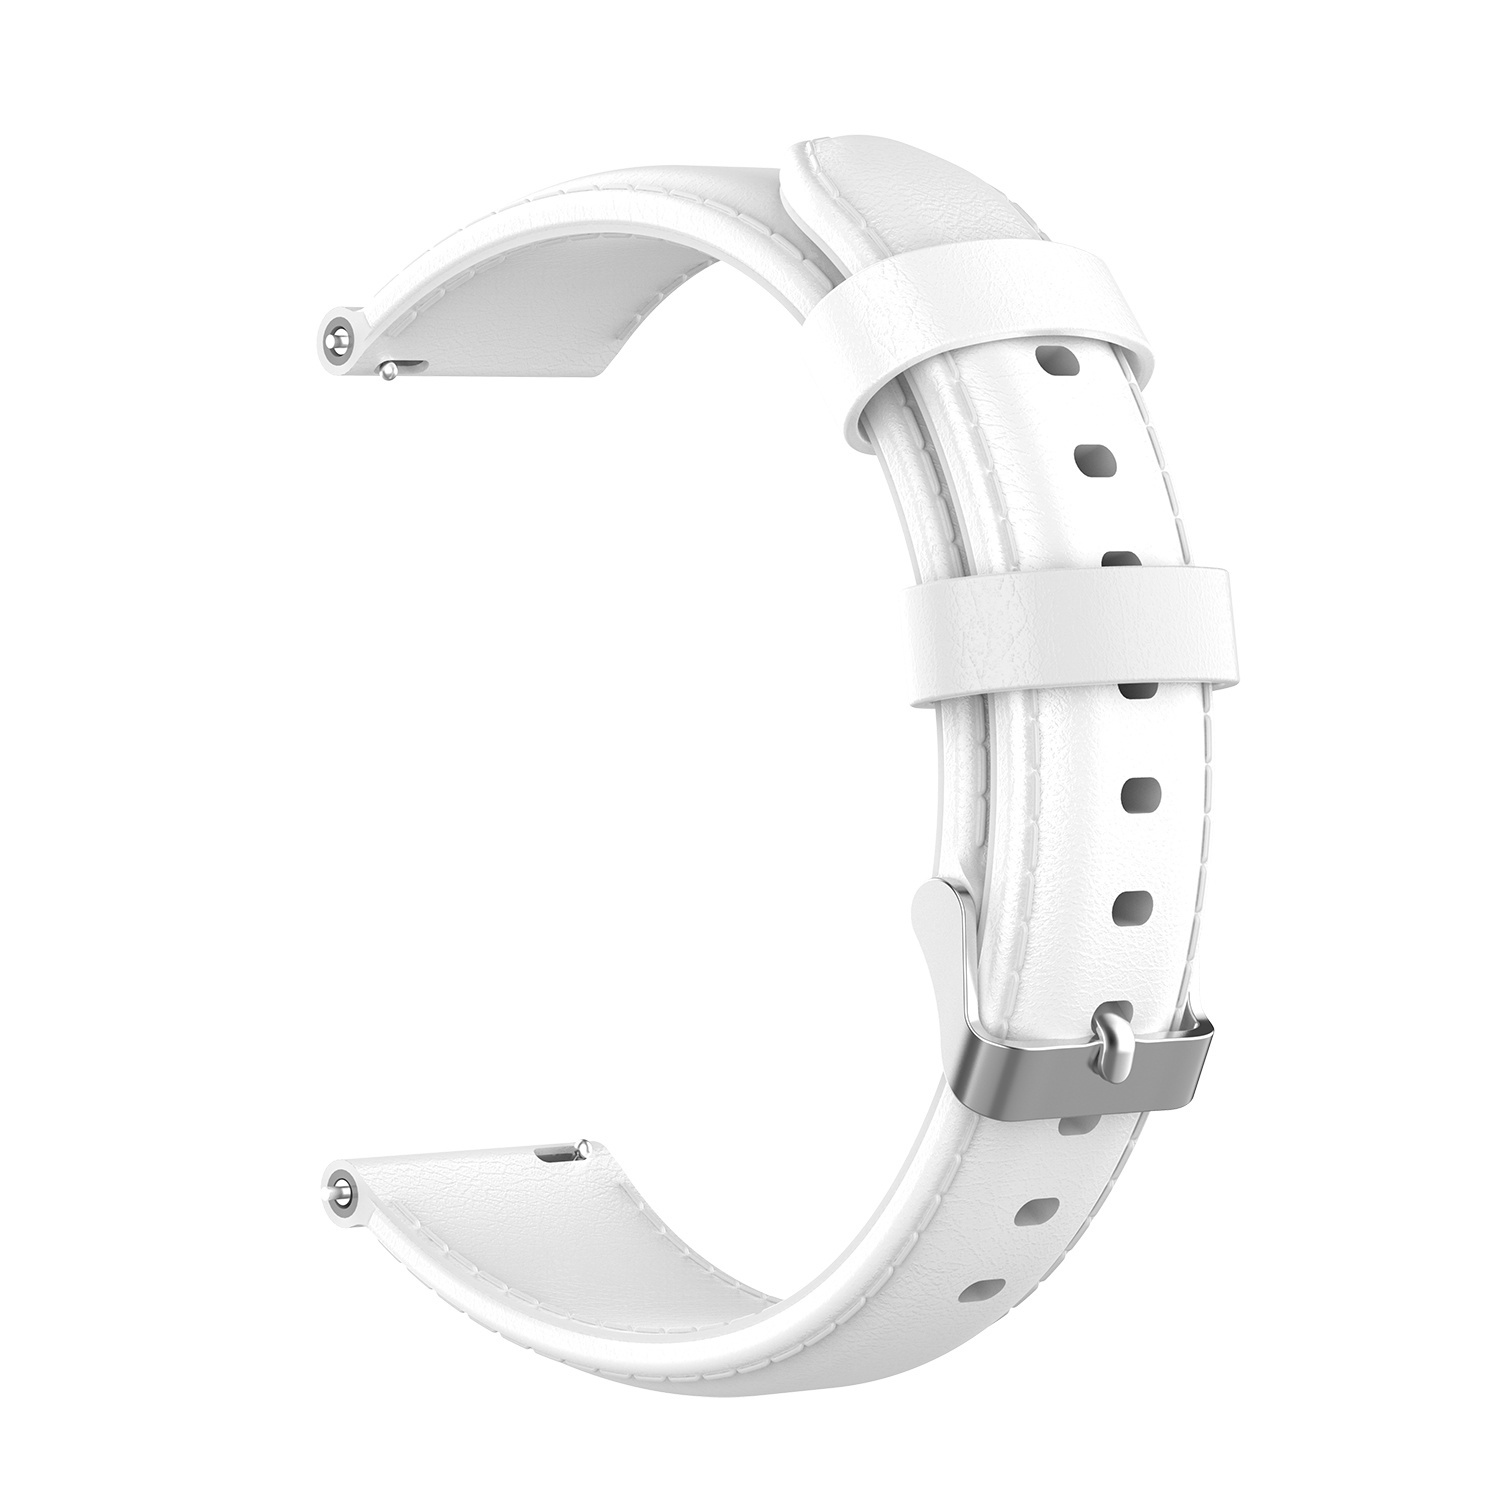 Huawei Watch Gt Leather Strap - White